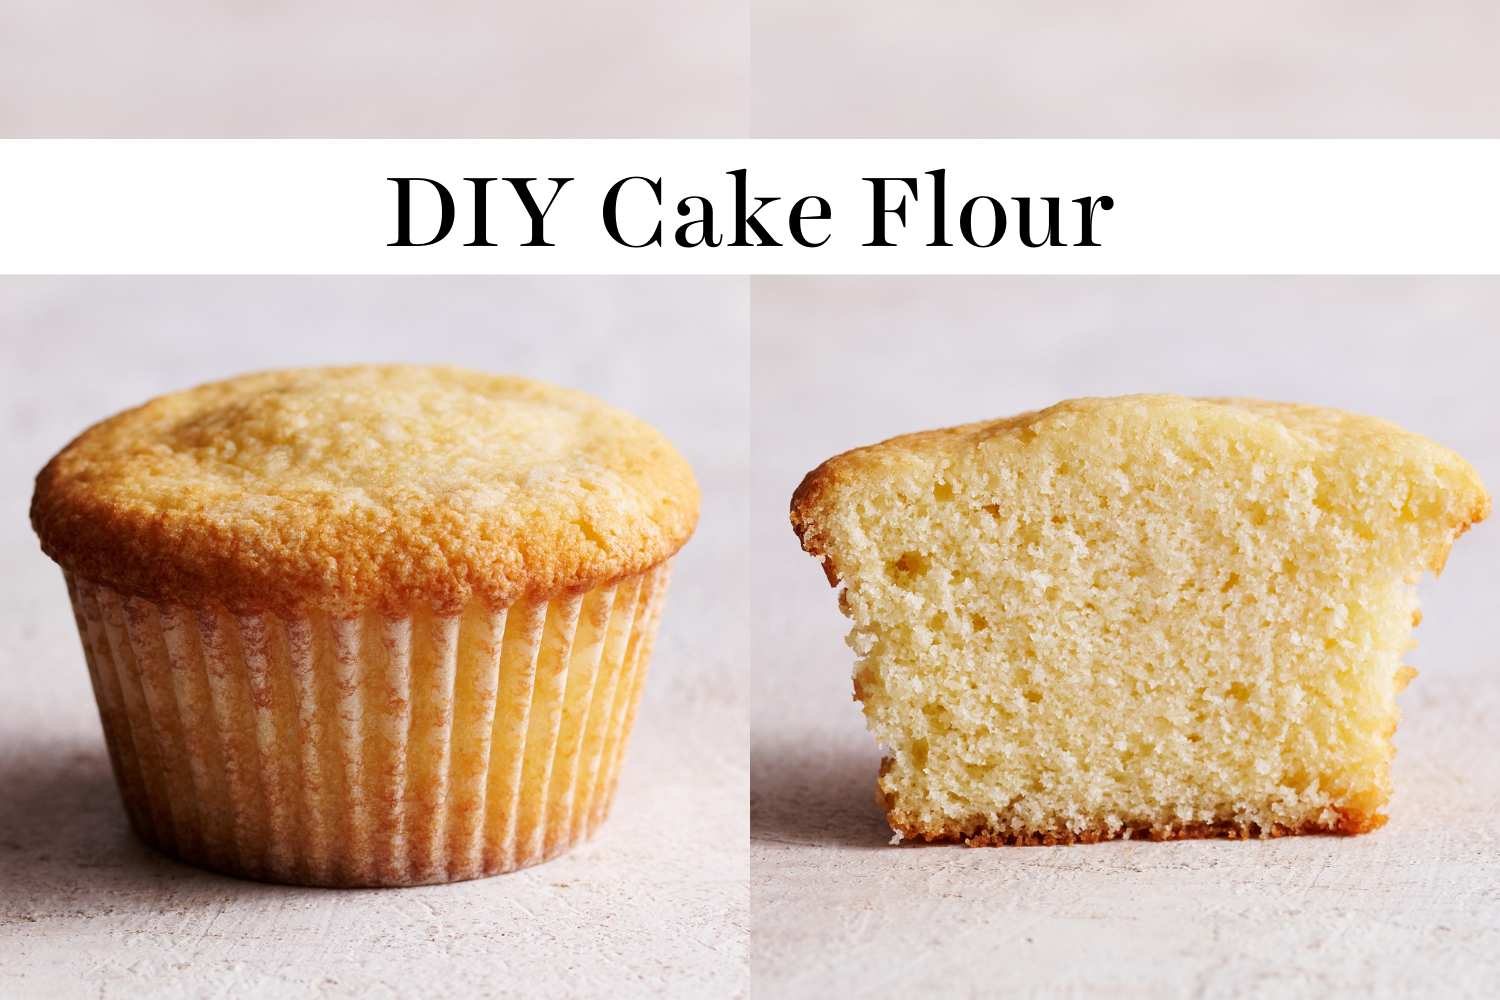 side-by-side whole cupcake with a cupcake cut in half, both made with DIY cake flour.